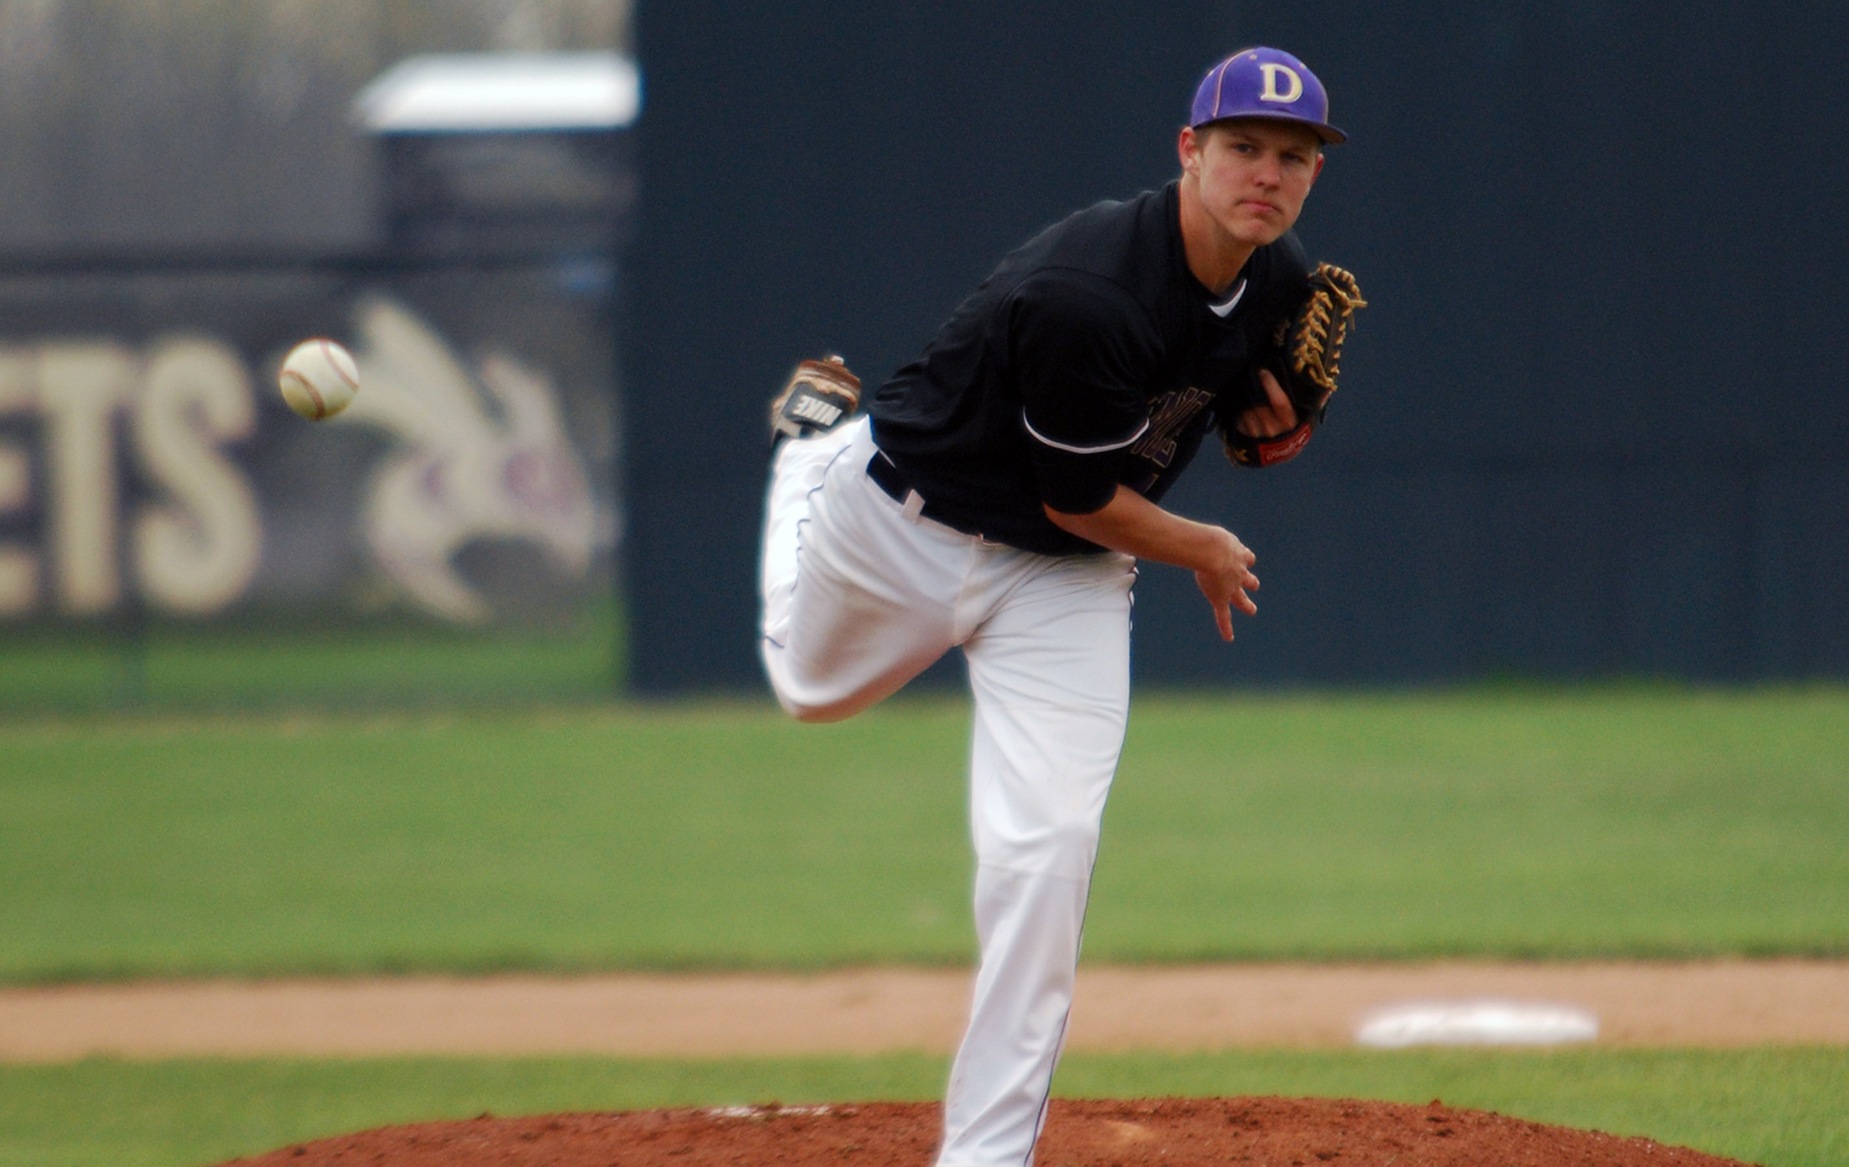 HCAC Names DC’s Waterman as Pitcher of the Week